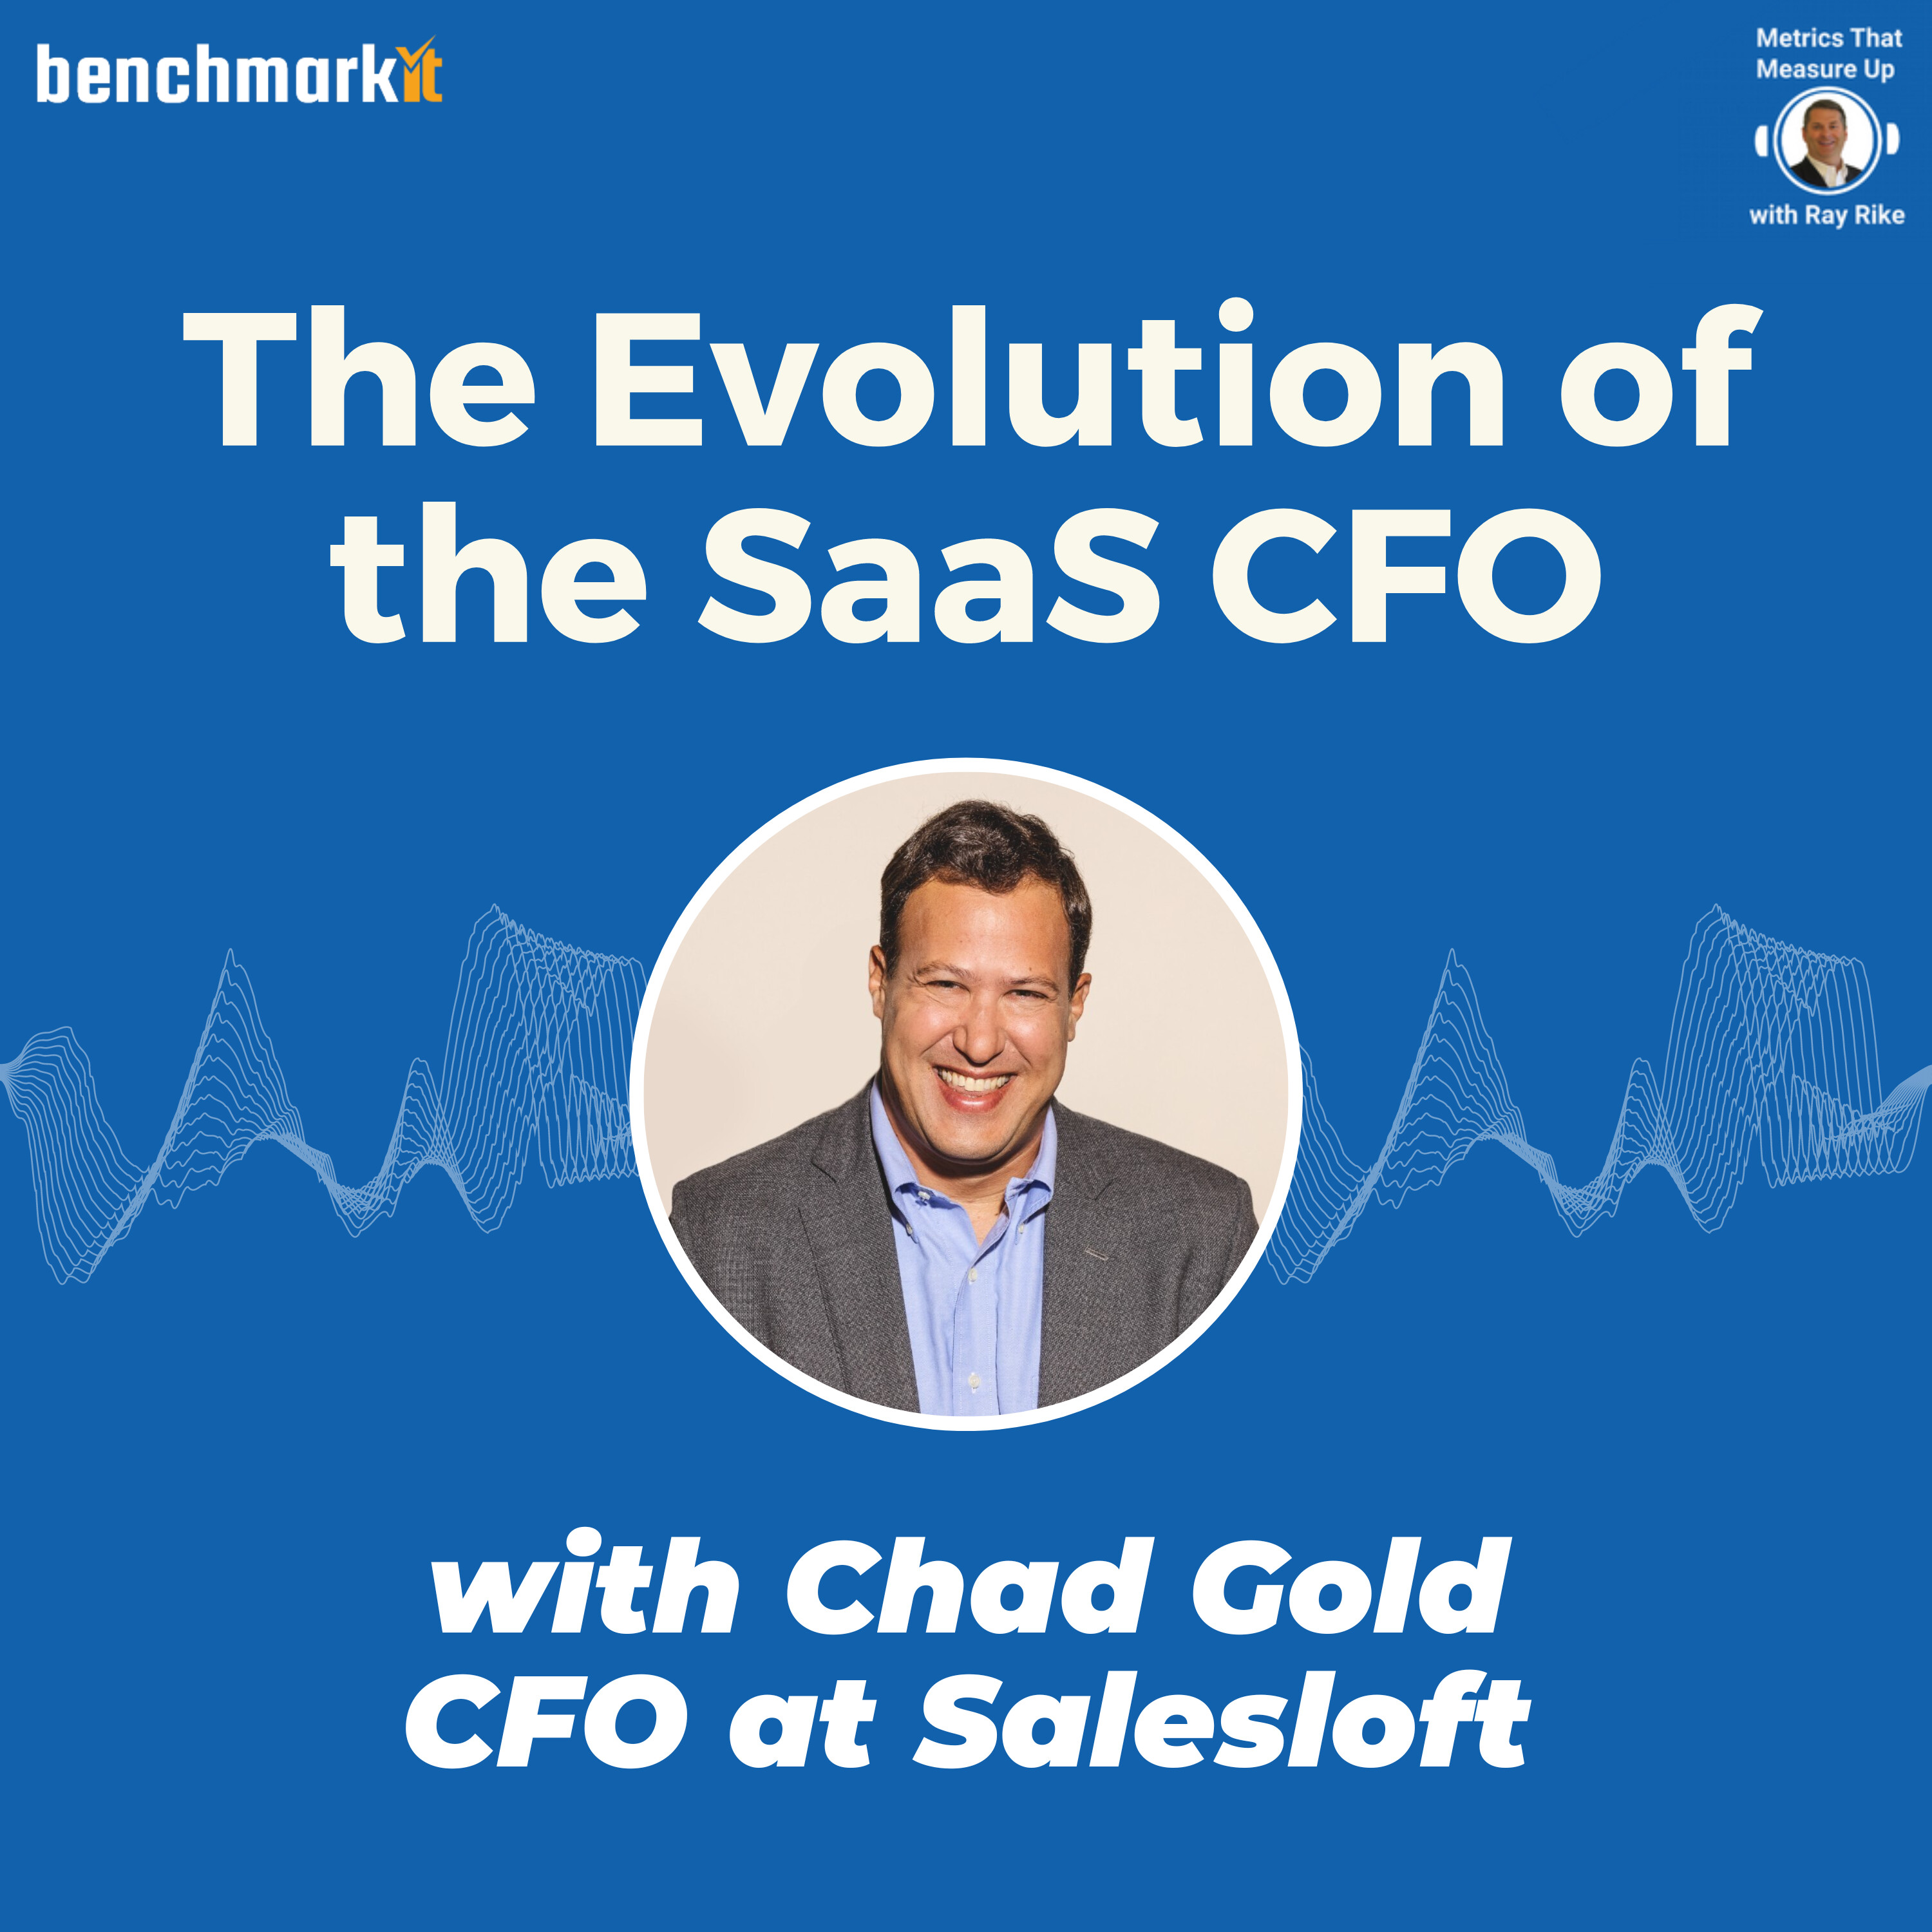 The Evolution of the SaaS CFO Role - with Chad Gold, Salesloft